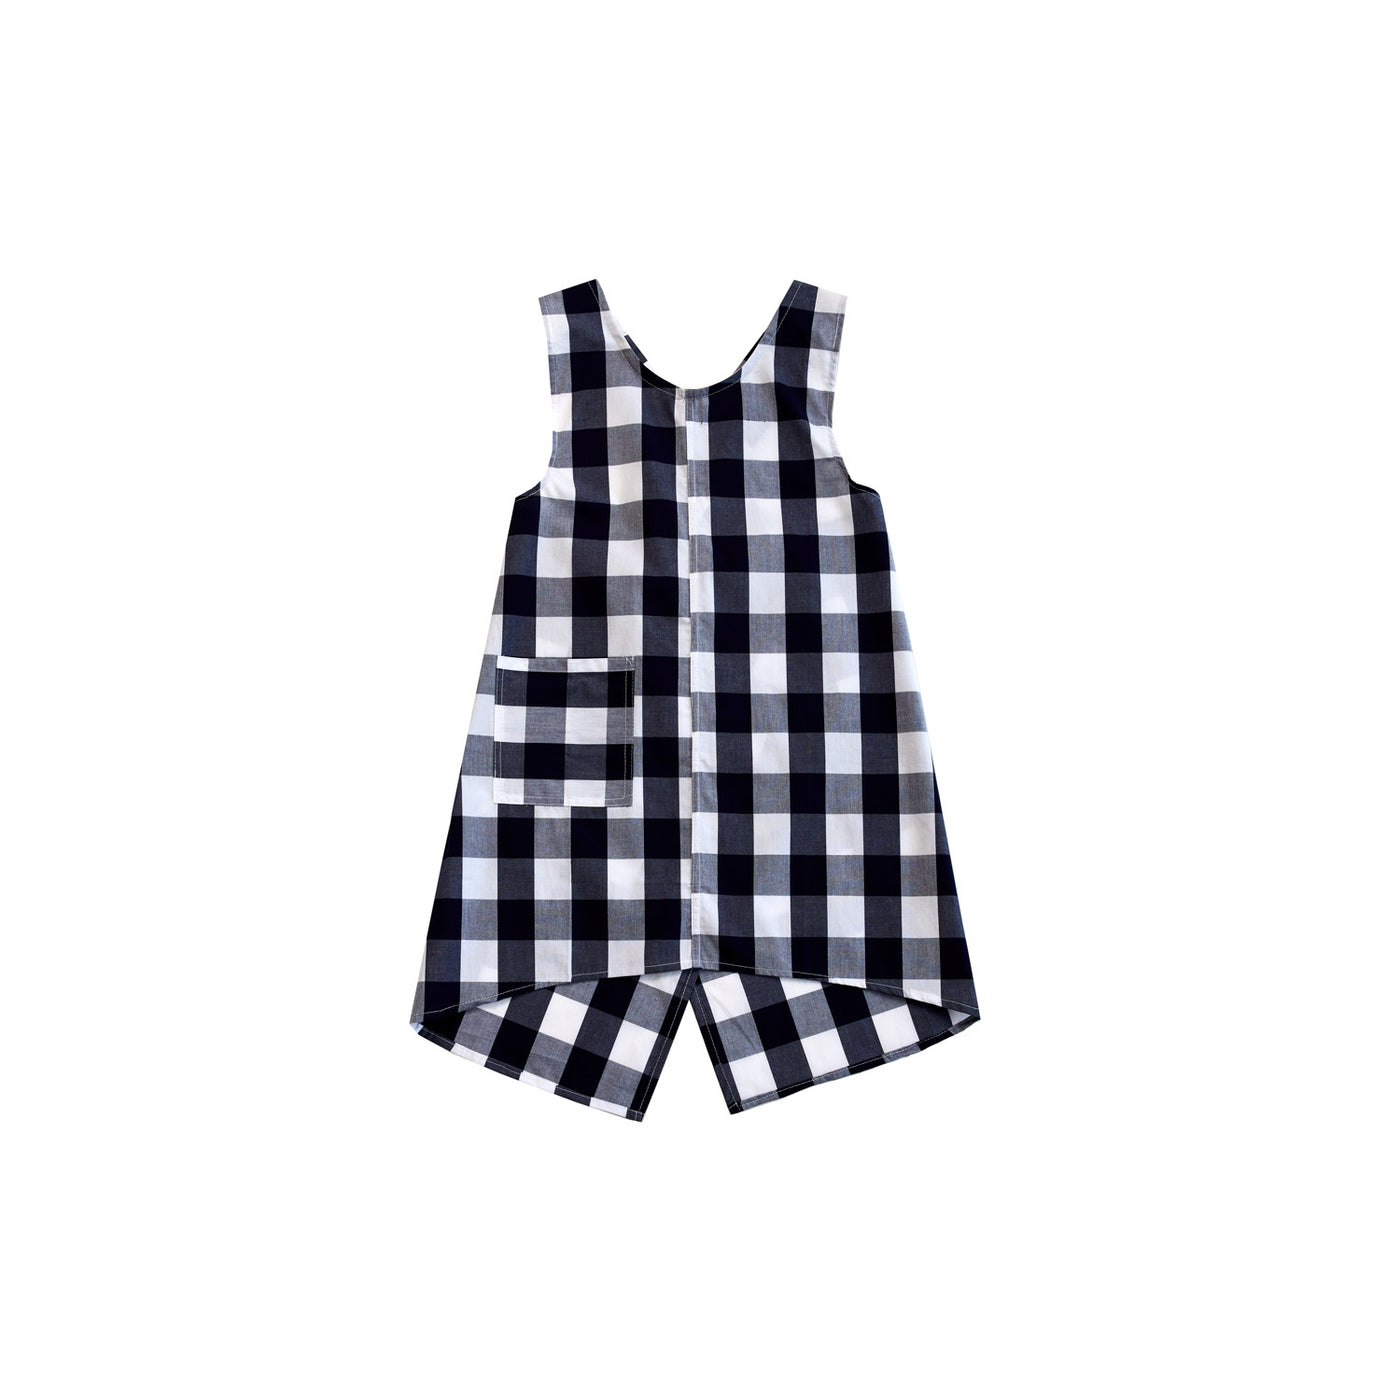 Kids Apron in Navy Gingham